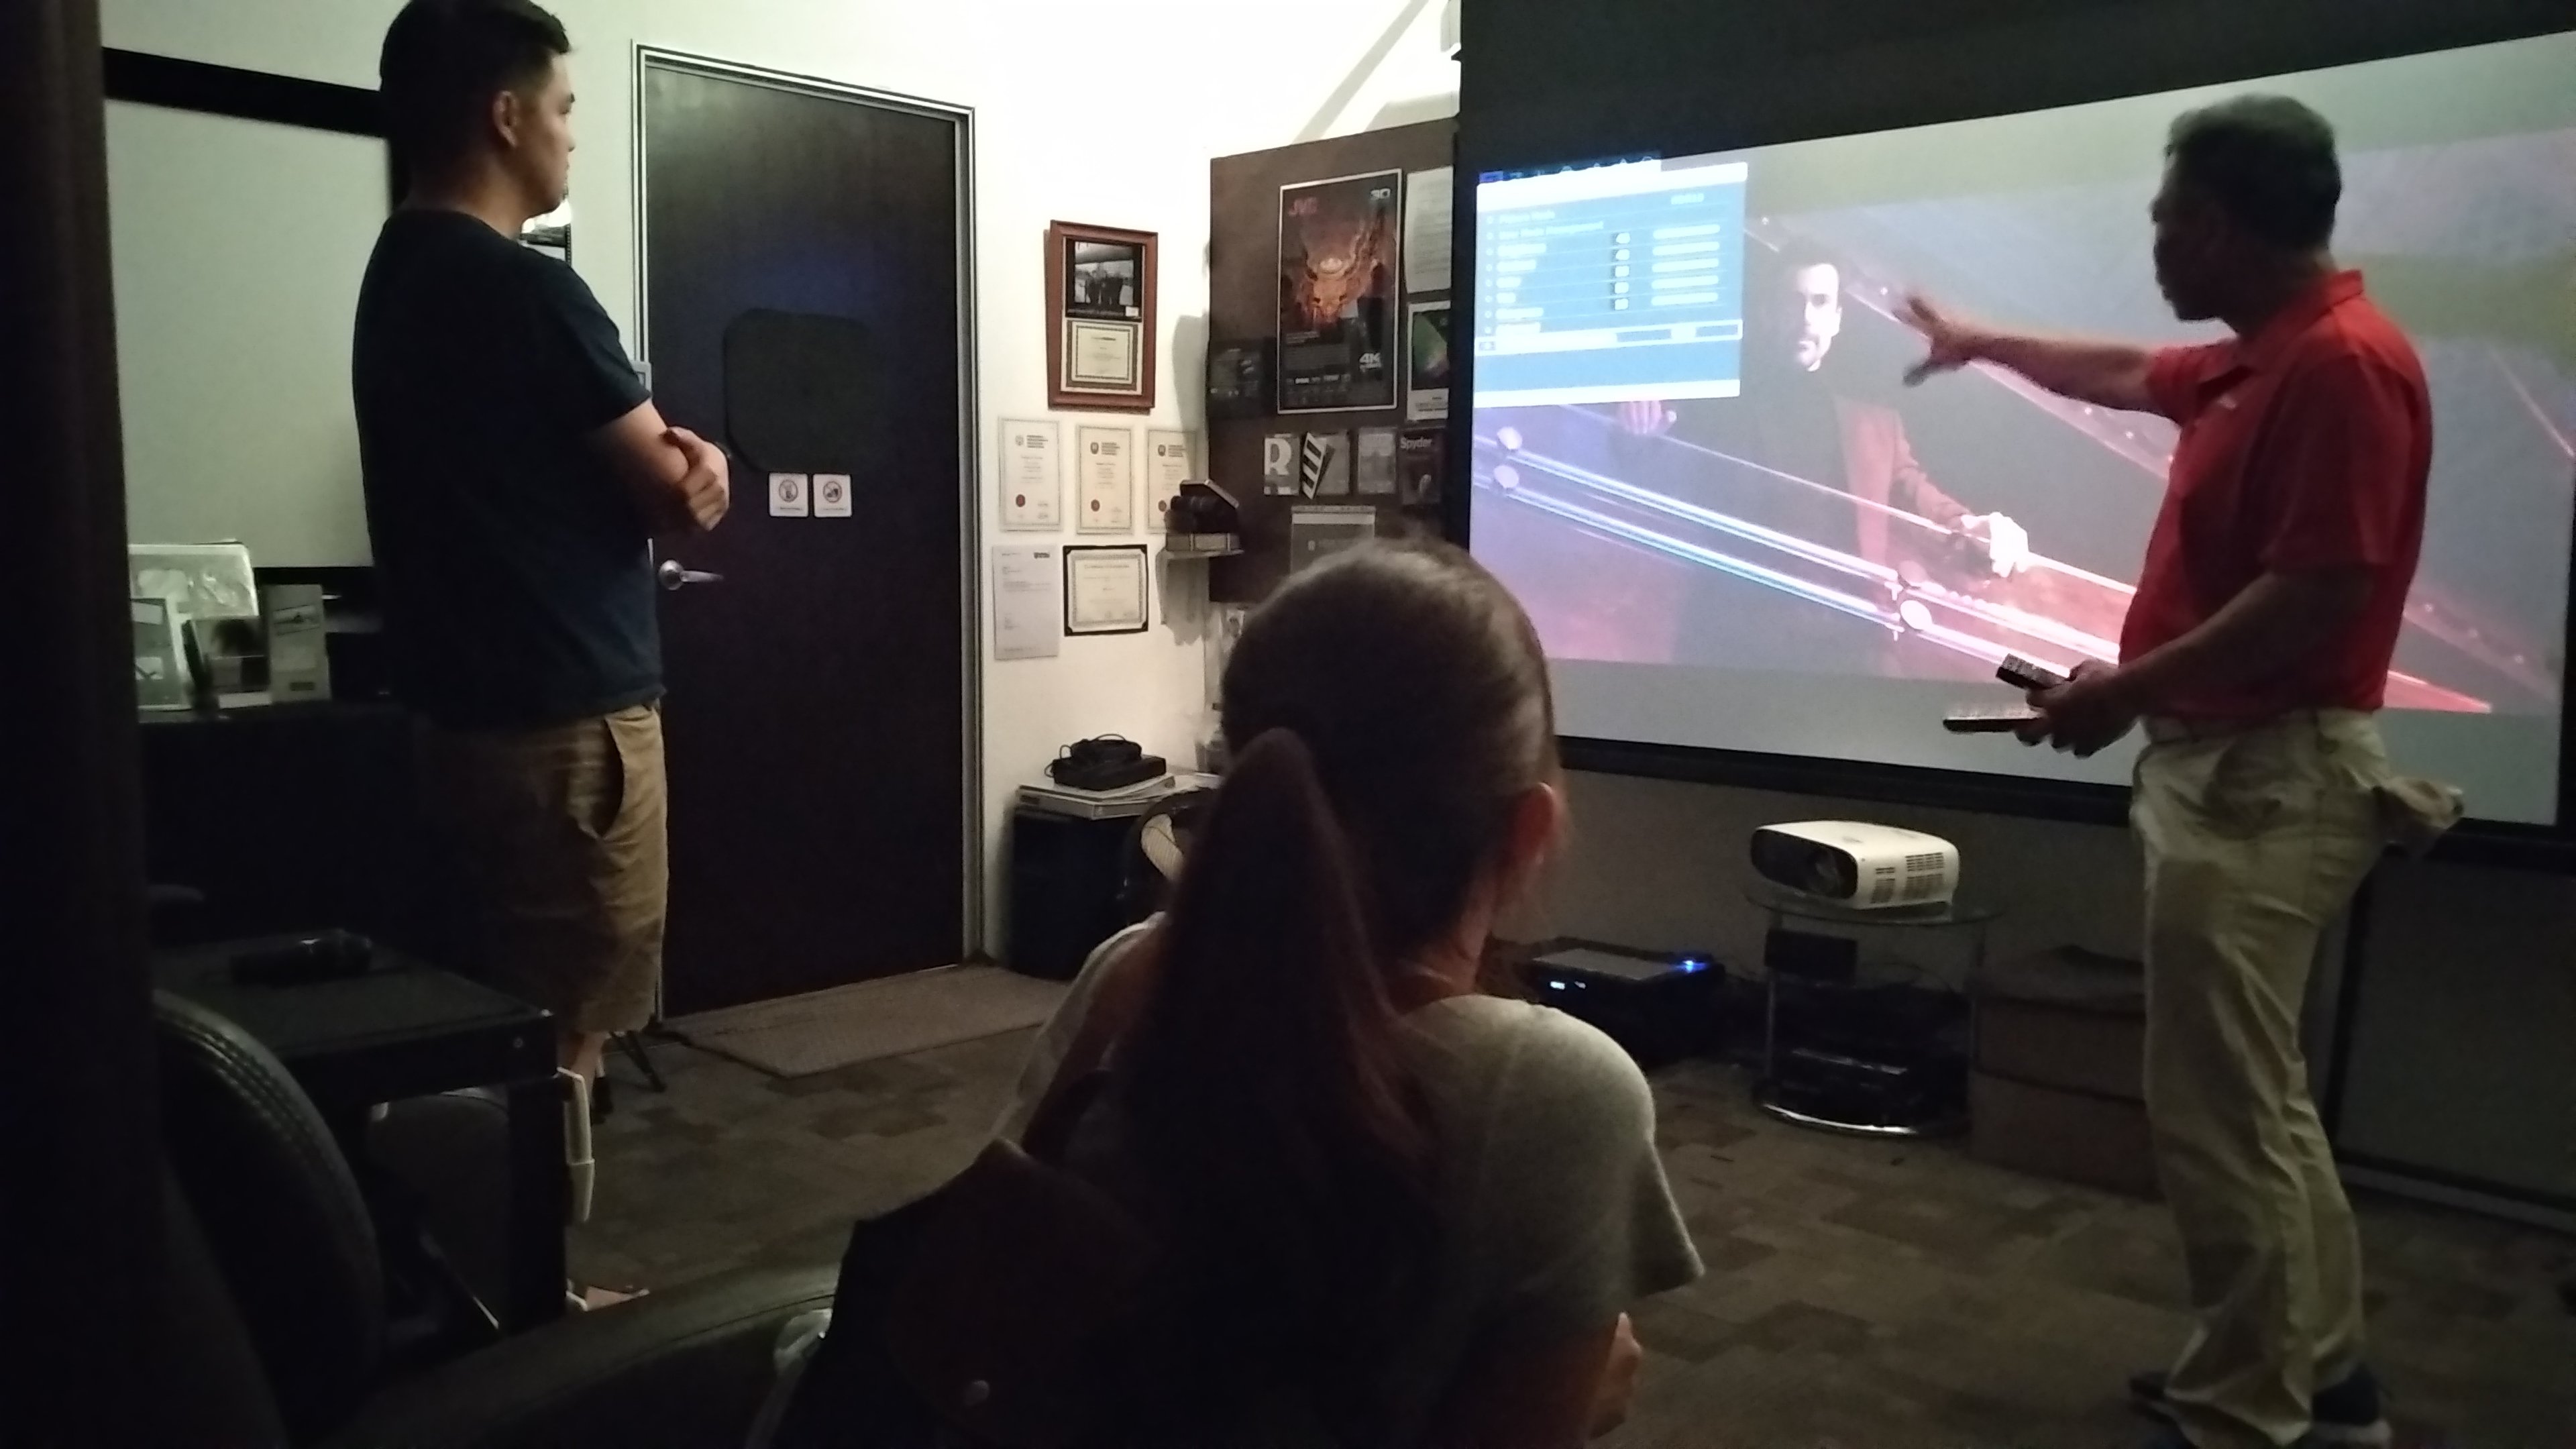 Home cinema and movie enthusiast asked many questions in the short throw projecto experience event